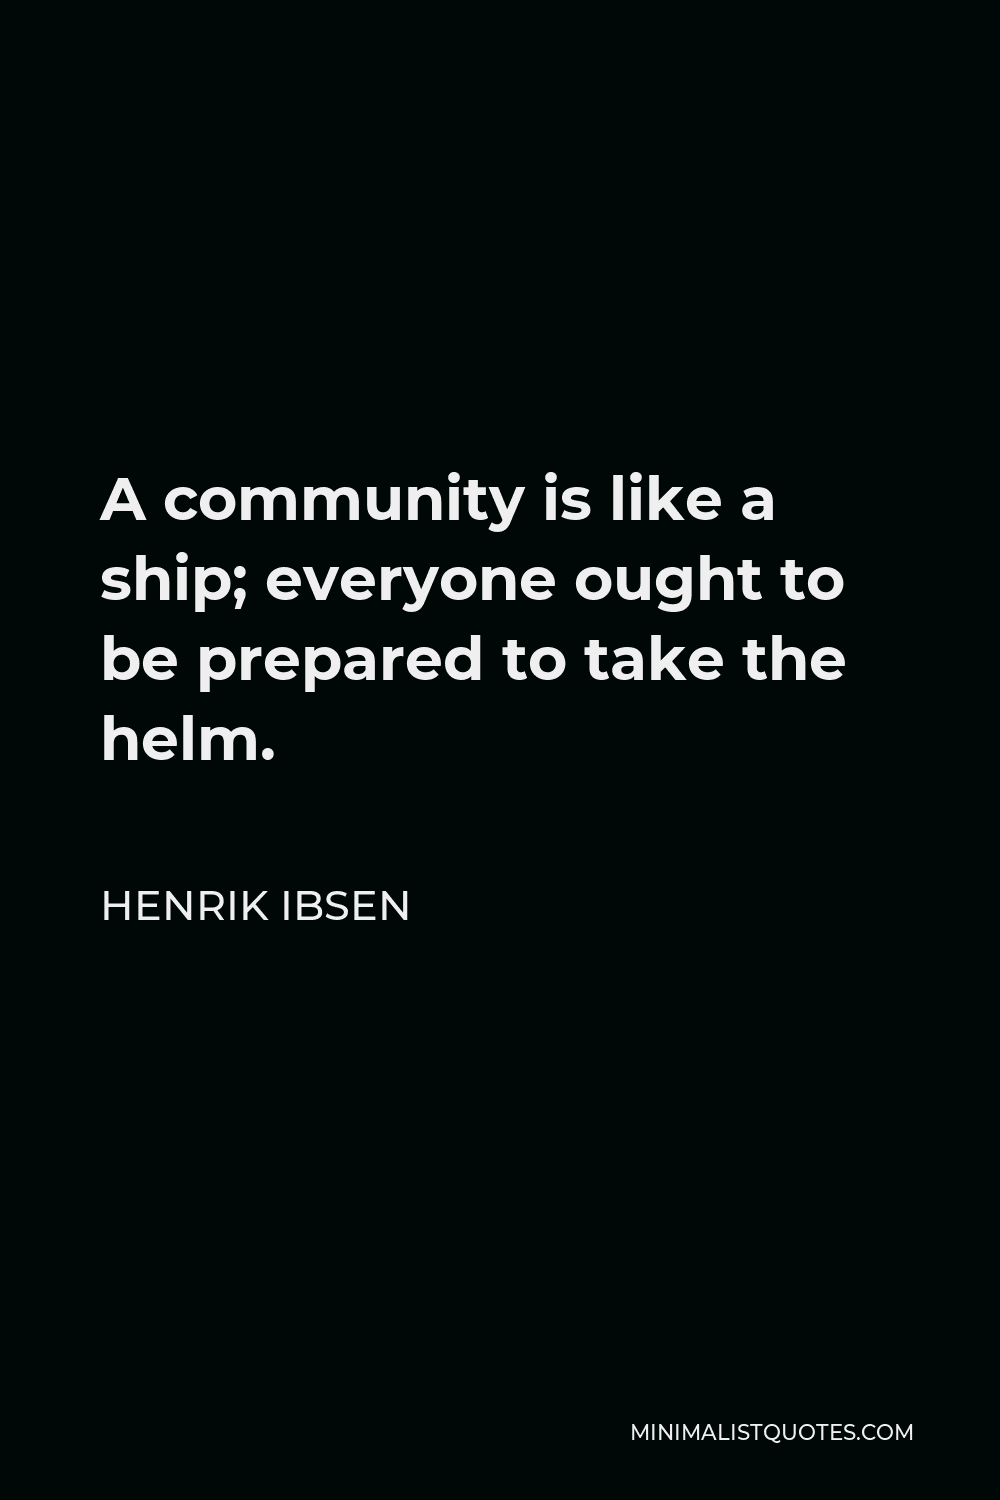 Henrik Ibsen Quote - A community is like a ship; everyone ought to be prepared to take the helm.